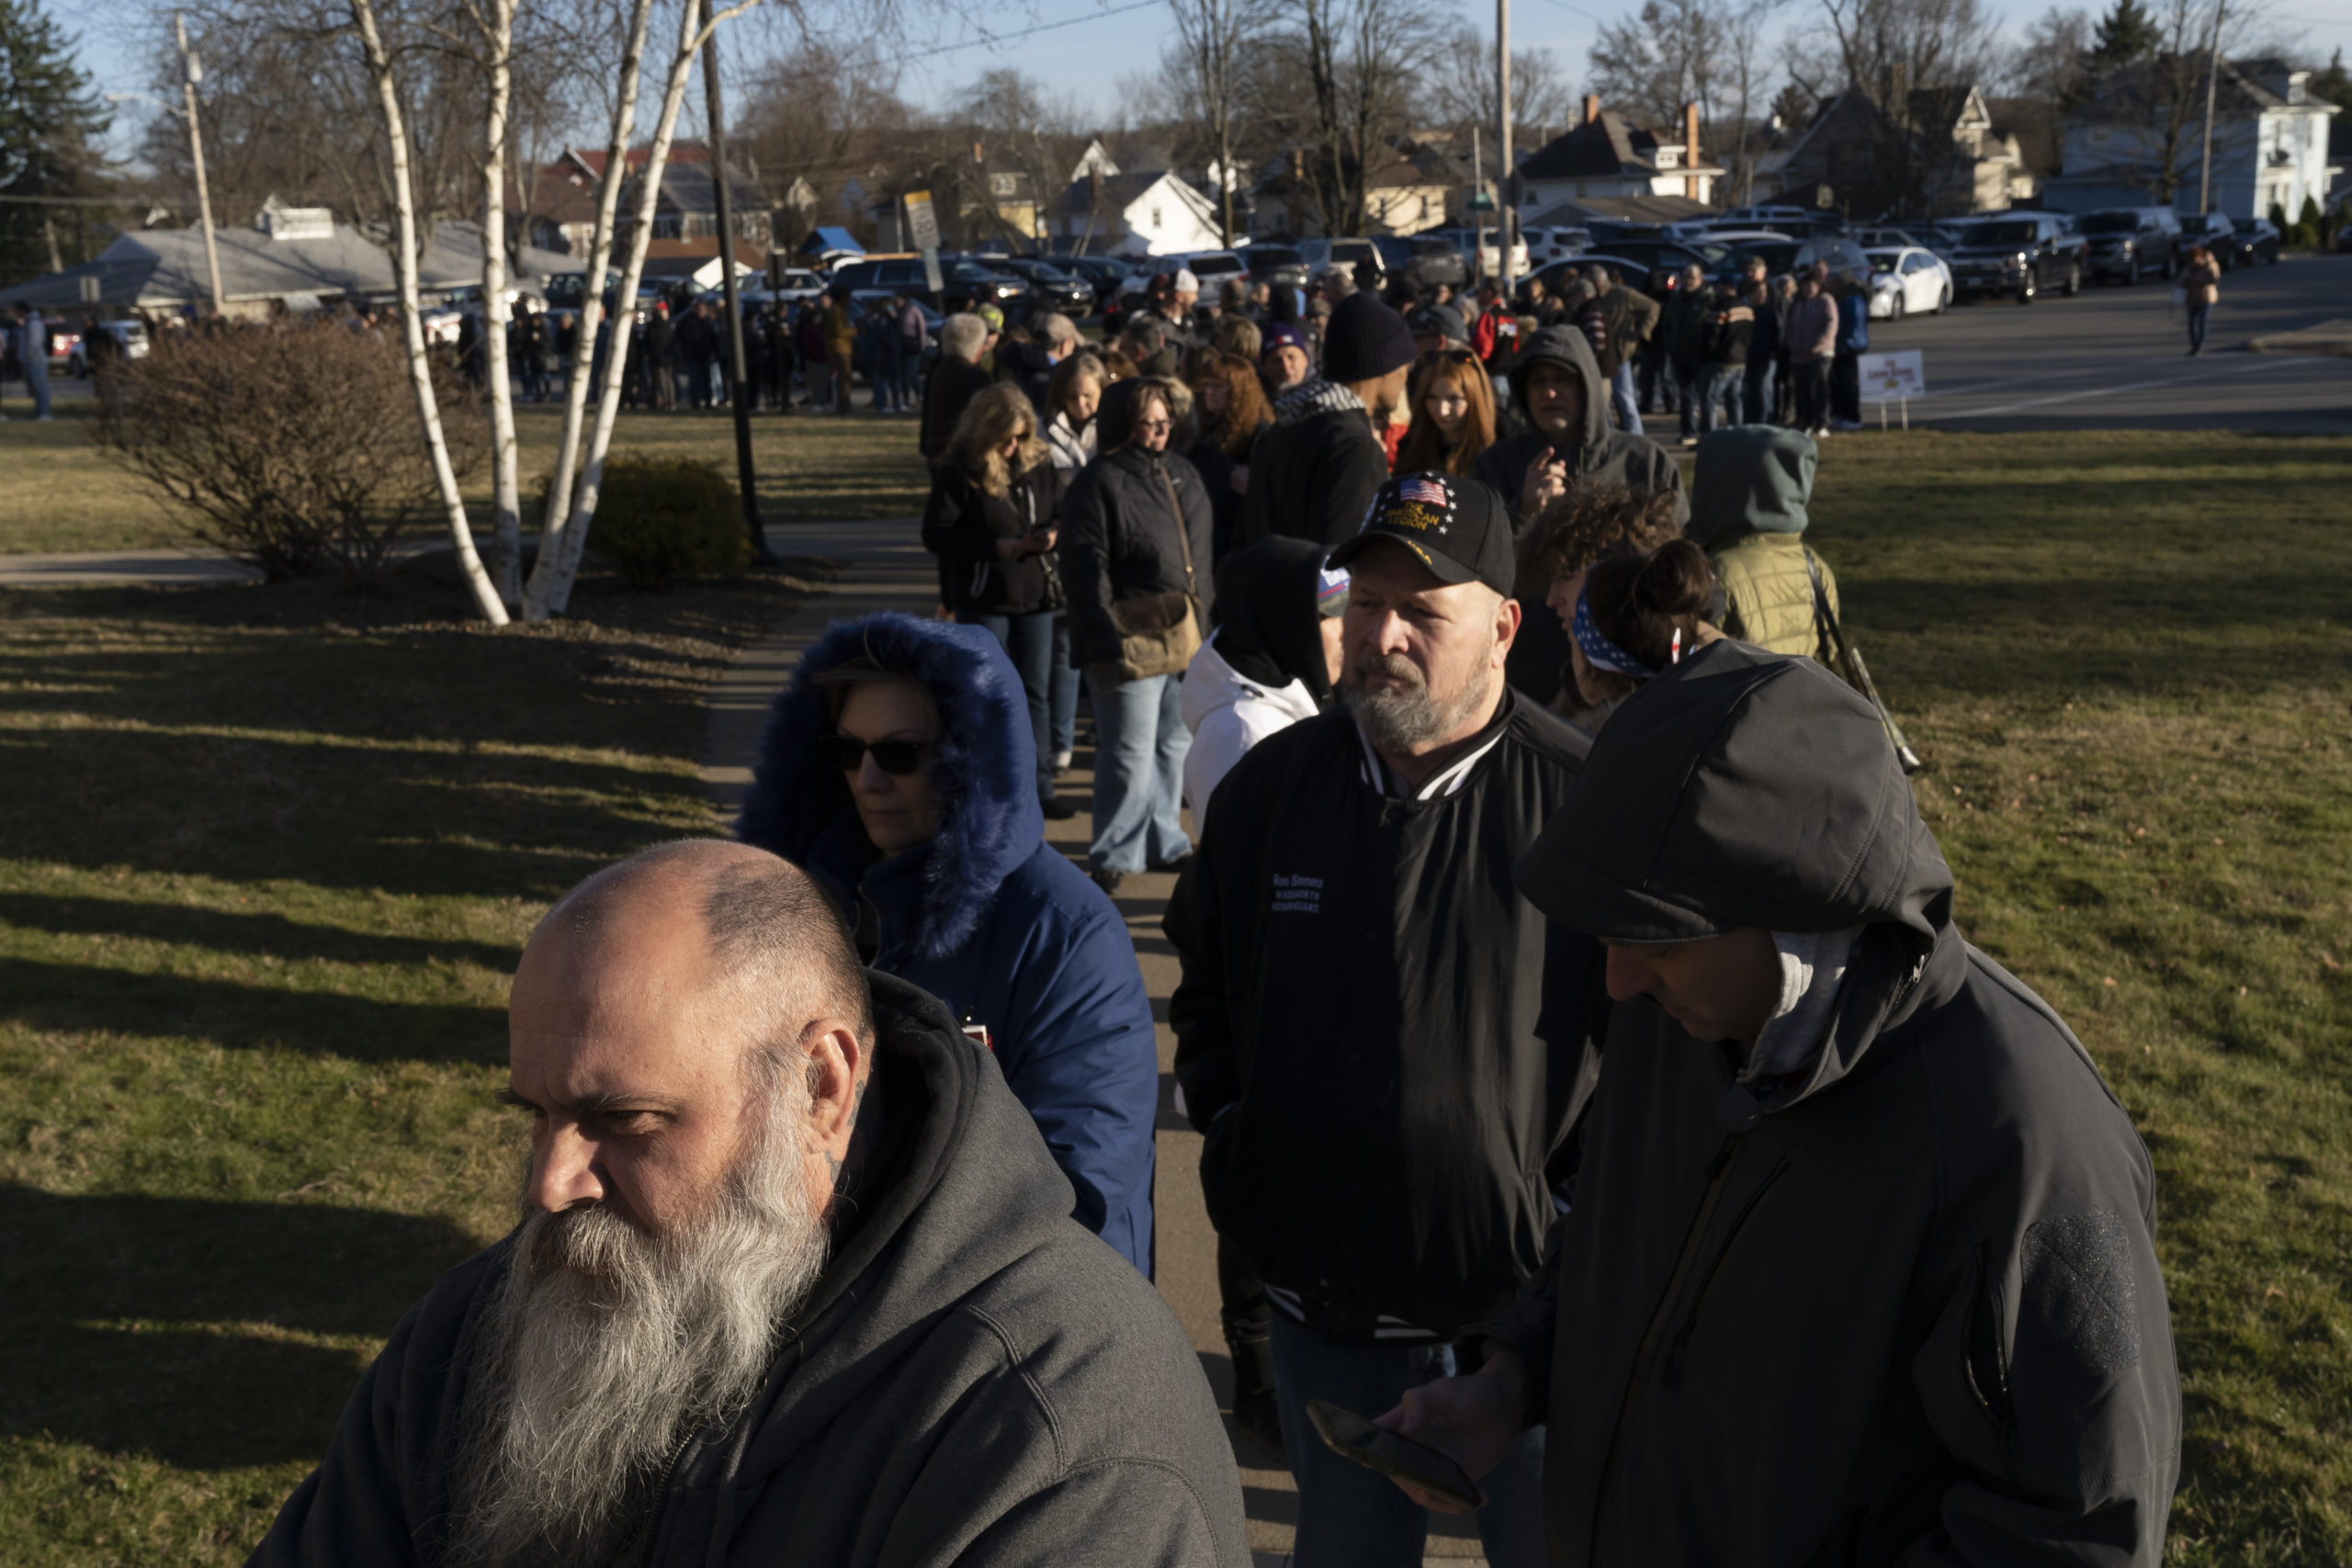 EAST PALESTINE, OH - FEBRUARY 24: Residents from East Palestine and surrounding areas wait in line for the town hall event held by environmental activist Erin Brockovich on February 24, 2023 in East Palestine, Ohio.